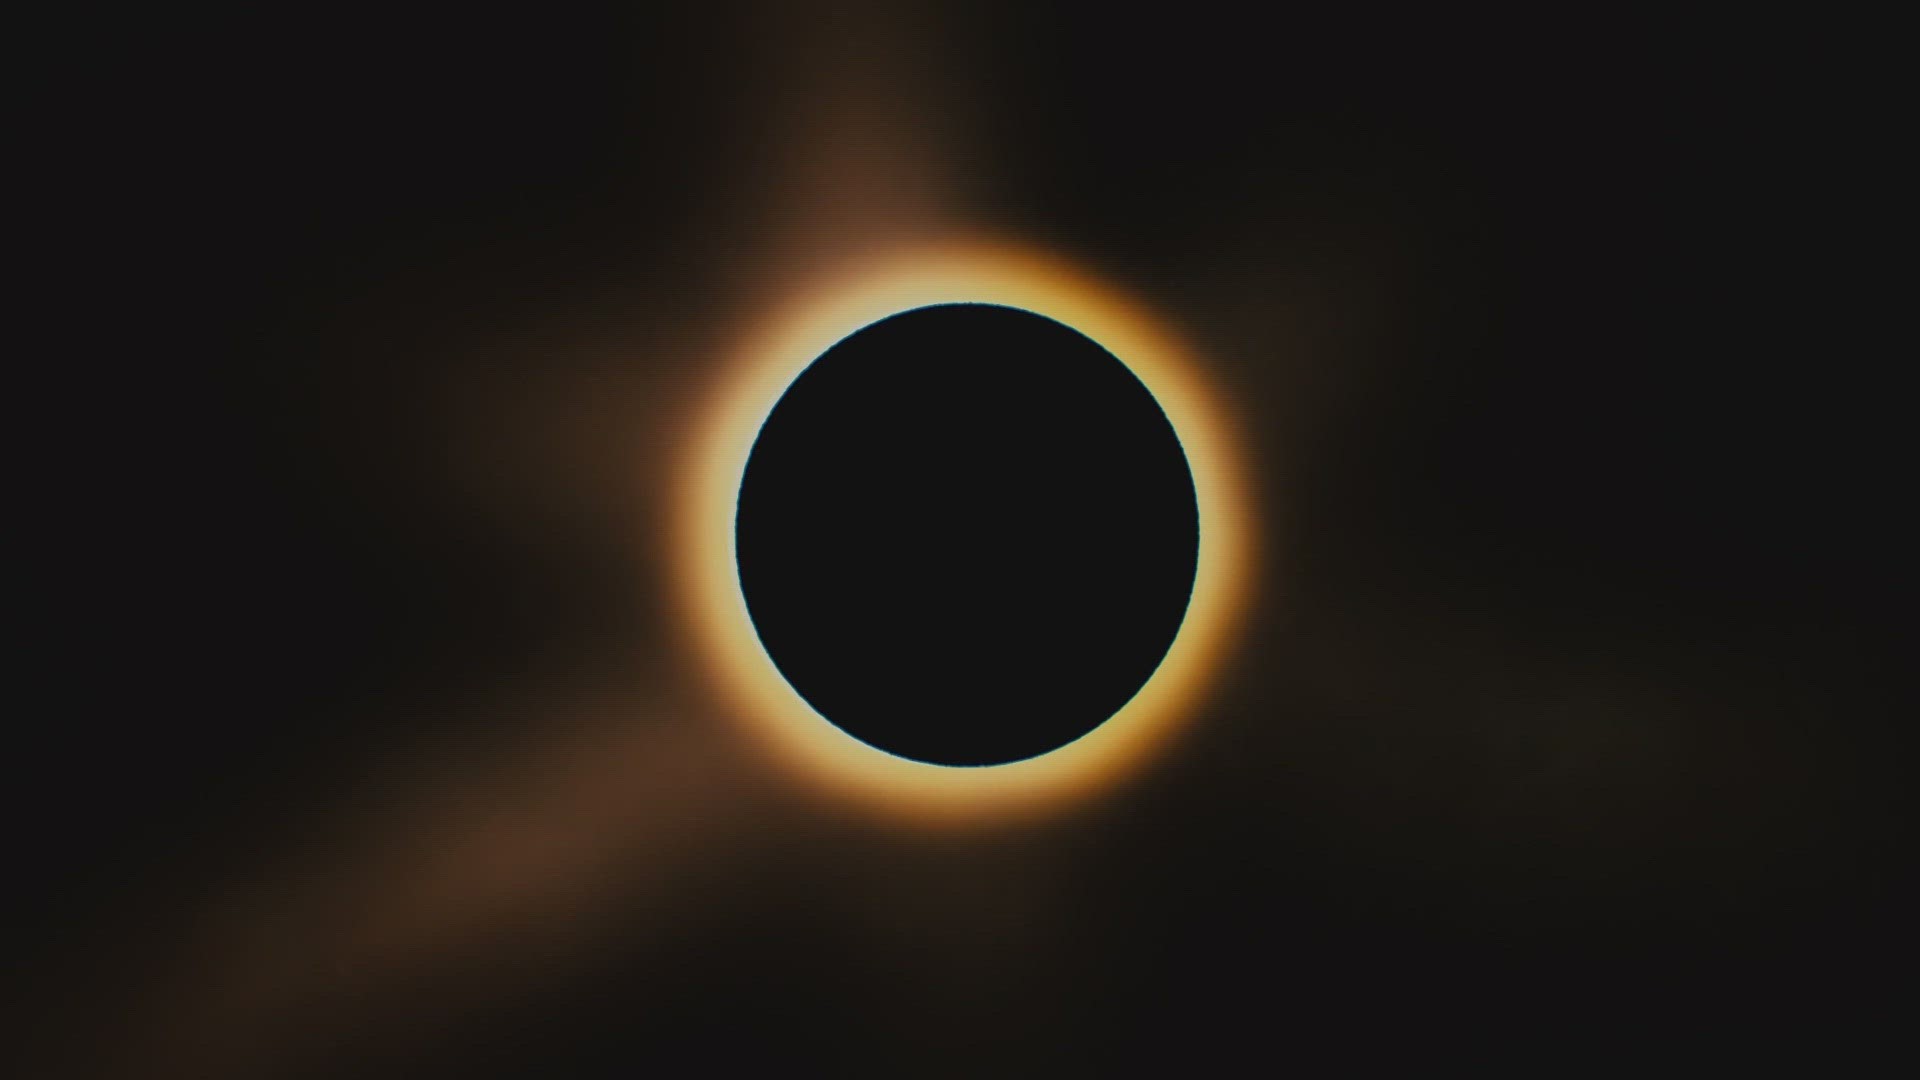 One local college is offering anyone a chance to learn more about solar eclipses ahead of April when central Indiana is in the path of totality.